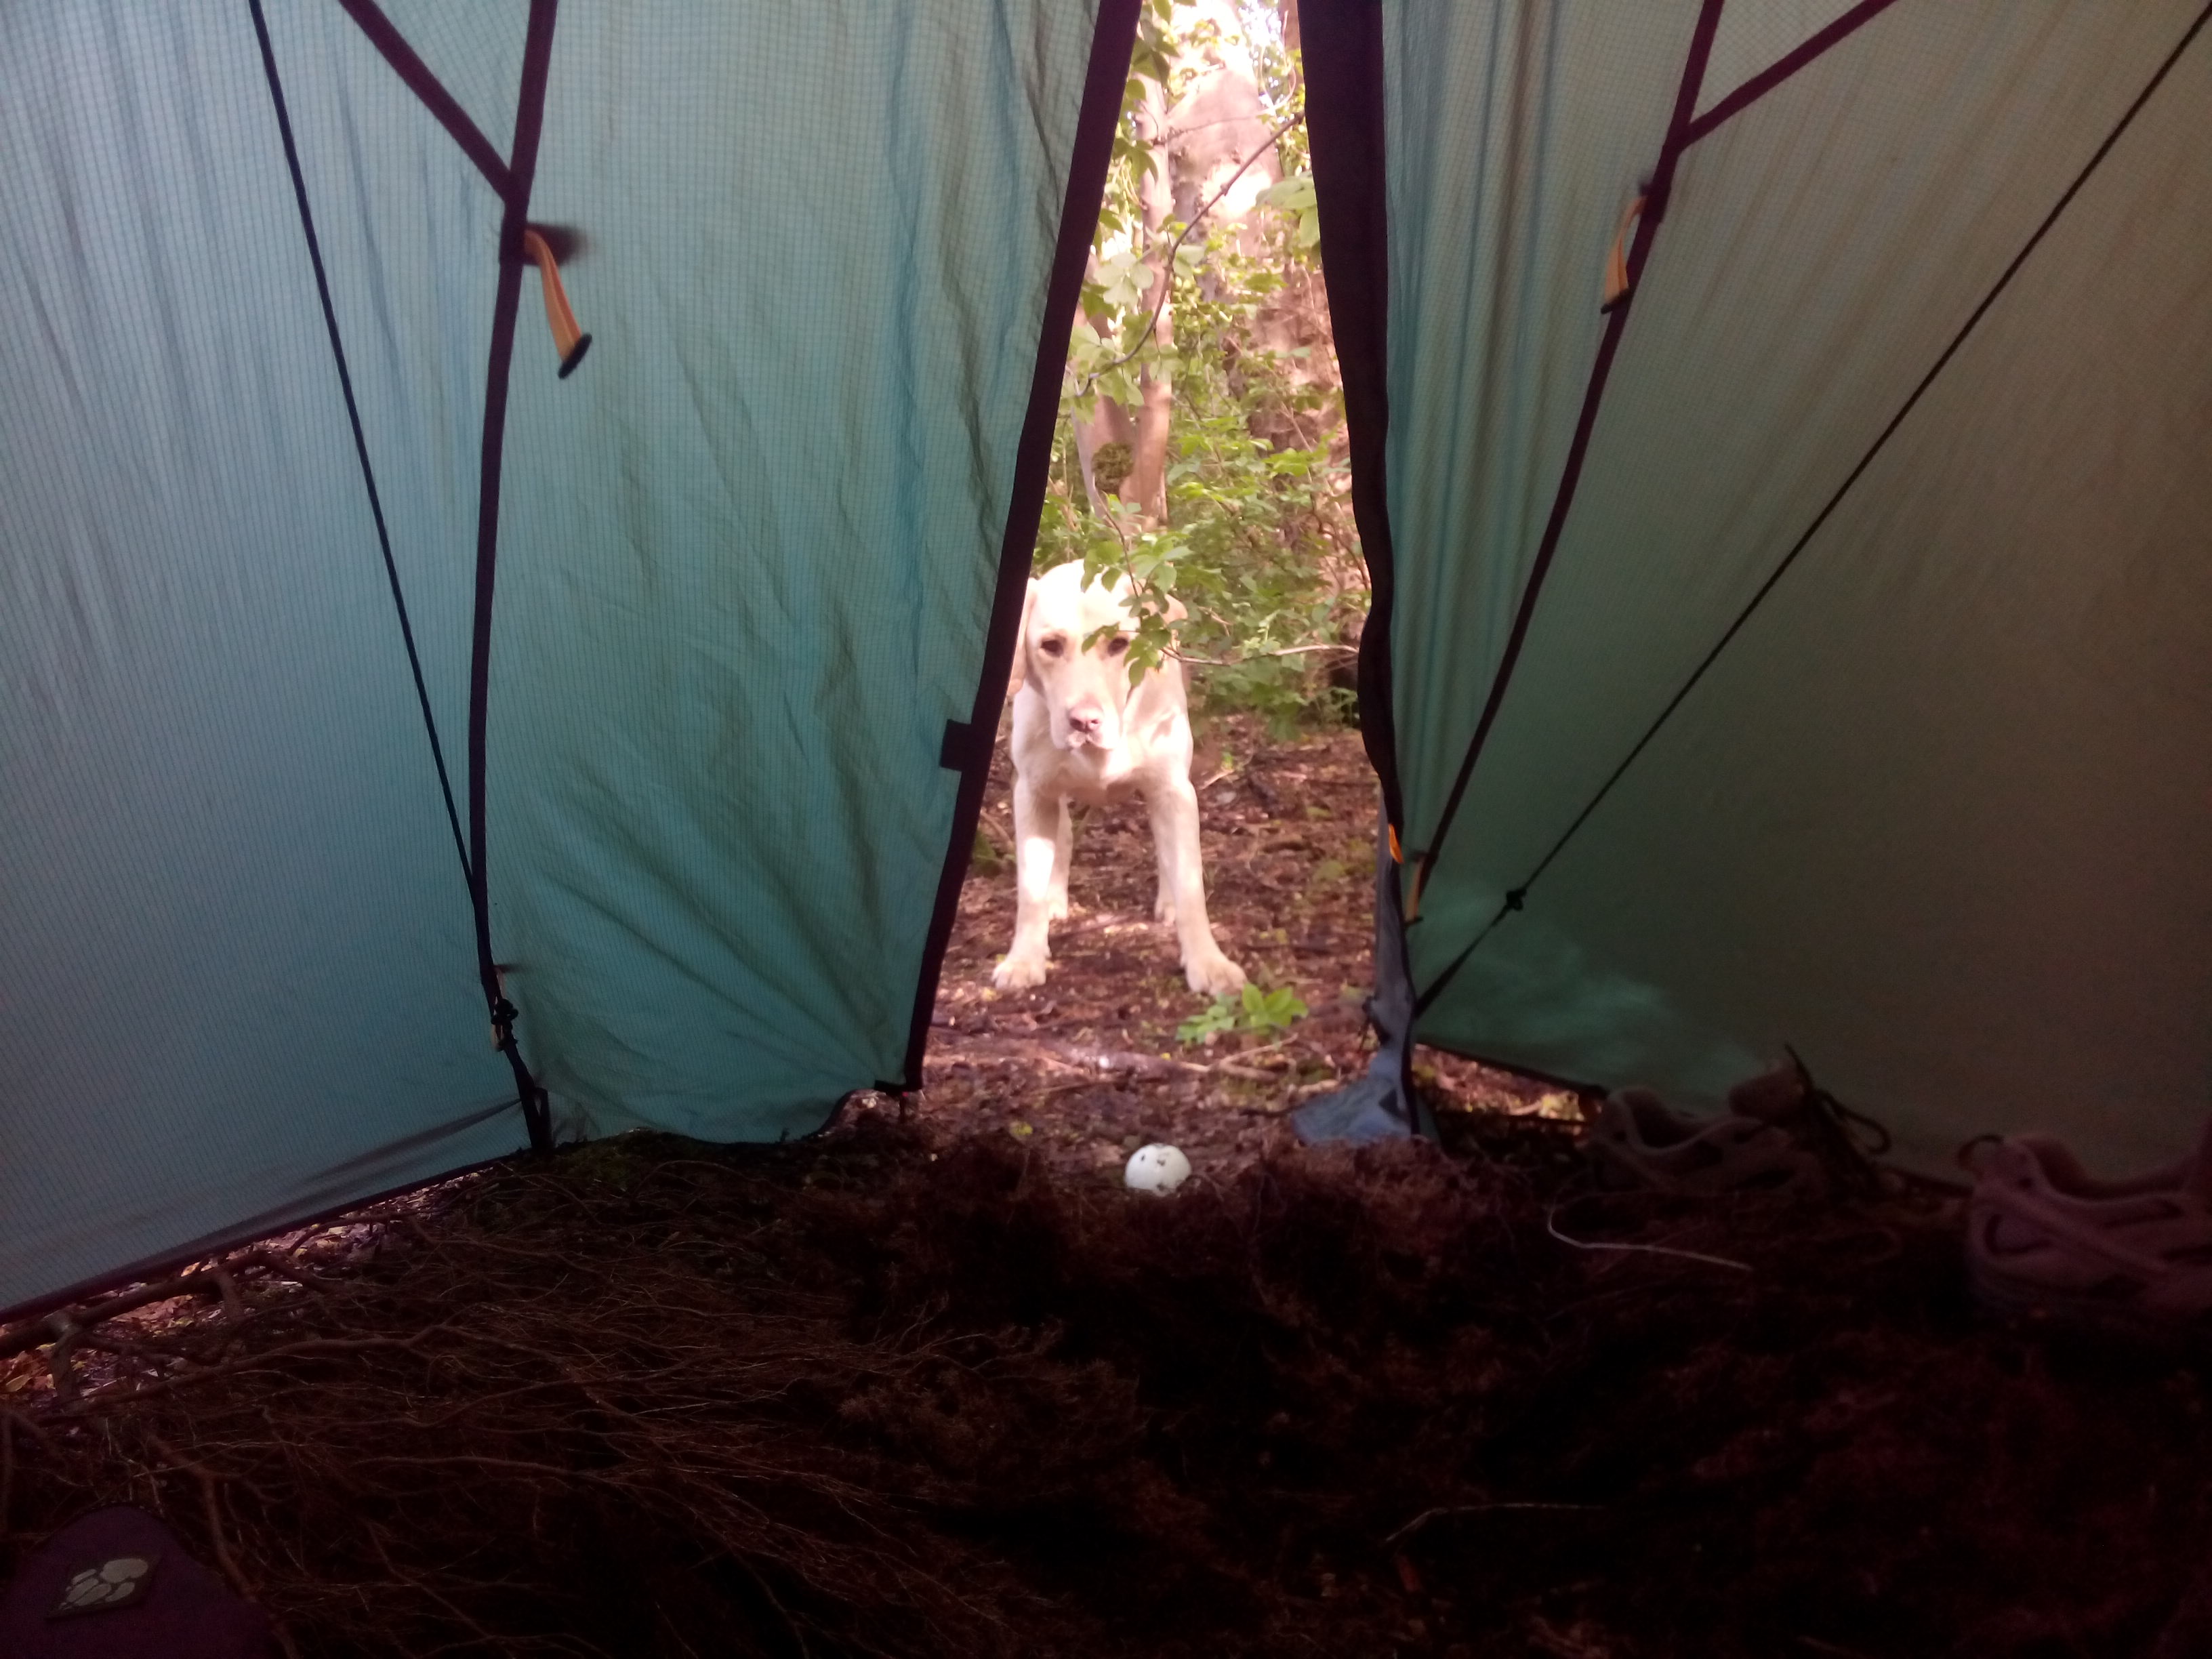 Max stands at the door to the tent, looking pleadingly at the ball he has just dropped there